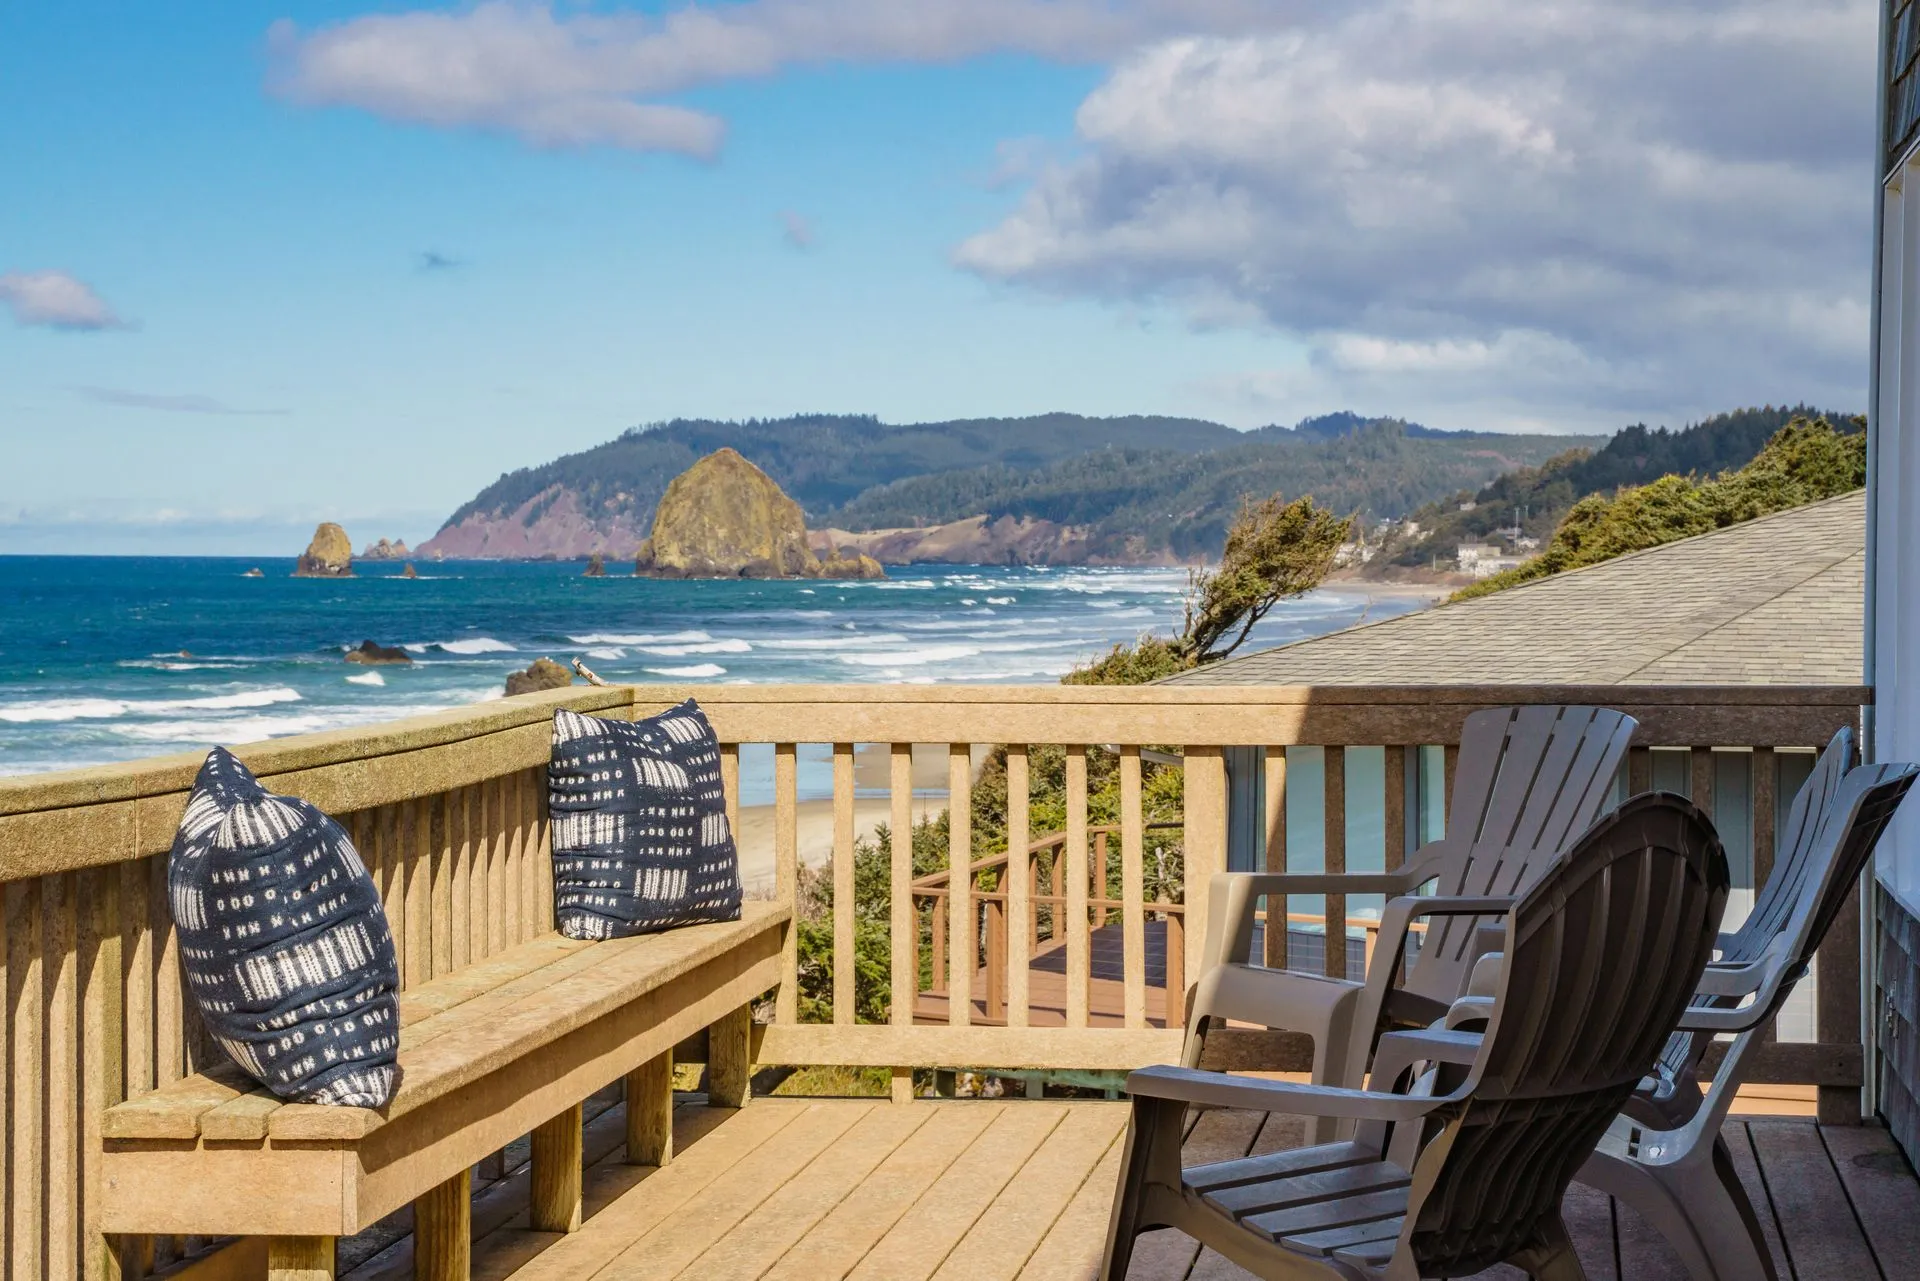 Vacation Rental in Cannon Beach, Pacific House deck with view of the ocean